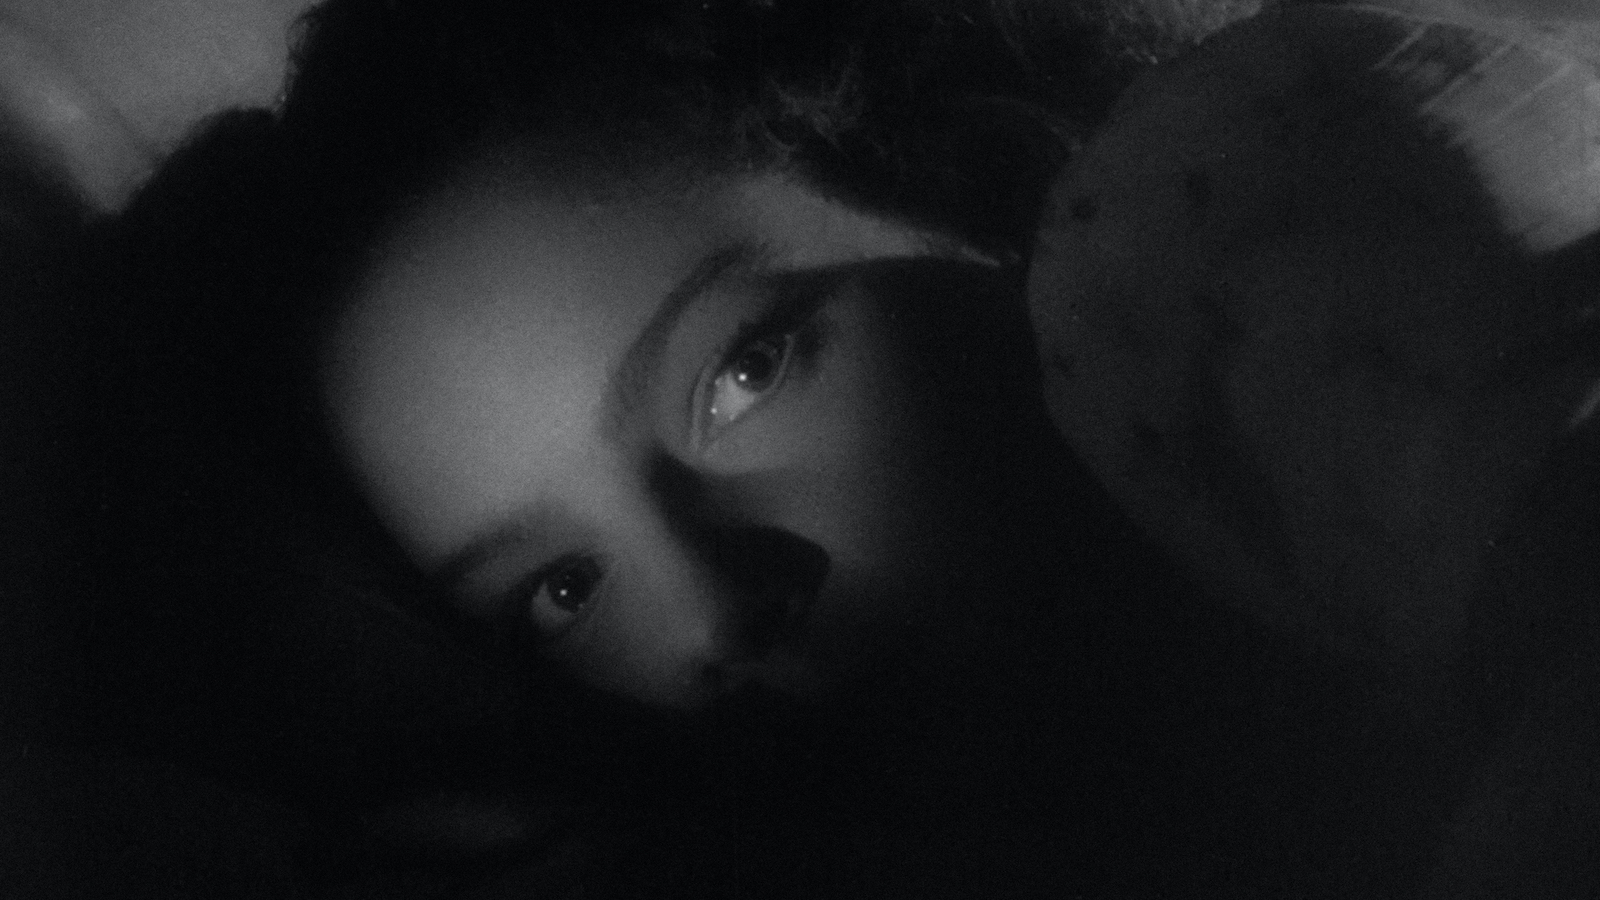 A woman's shadowed face in black-and-white looks off screen, her eyes illuminated